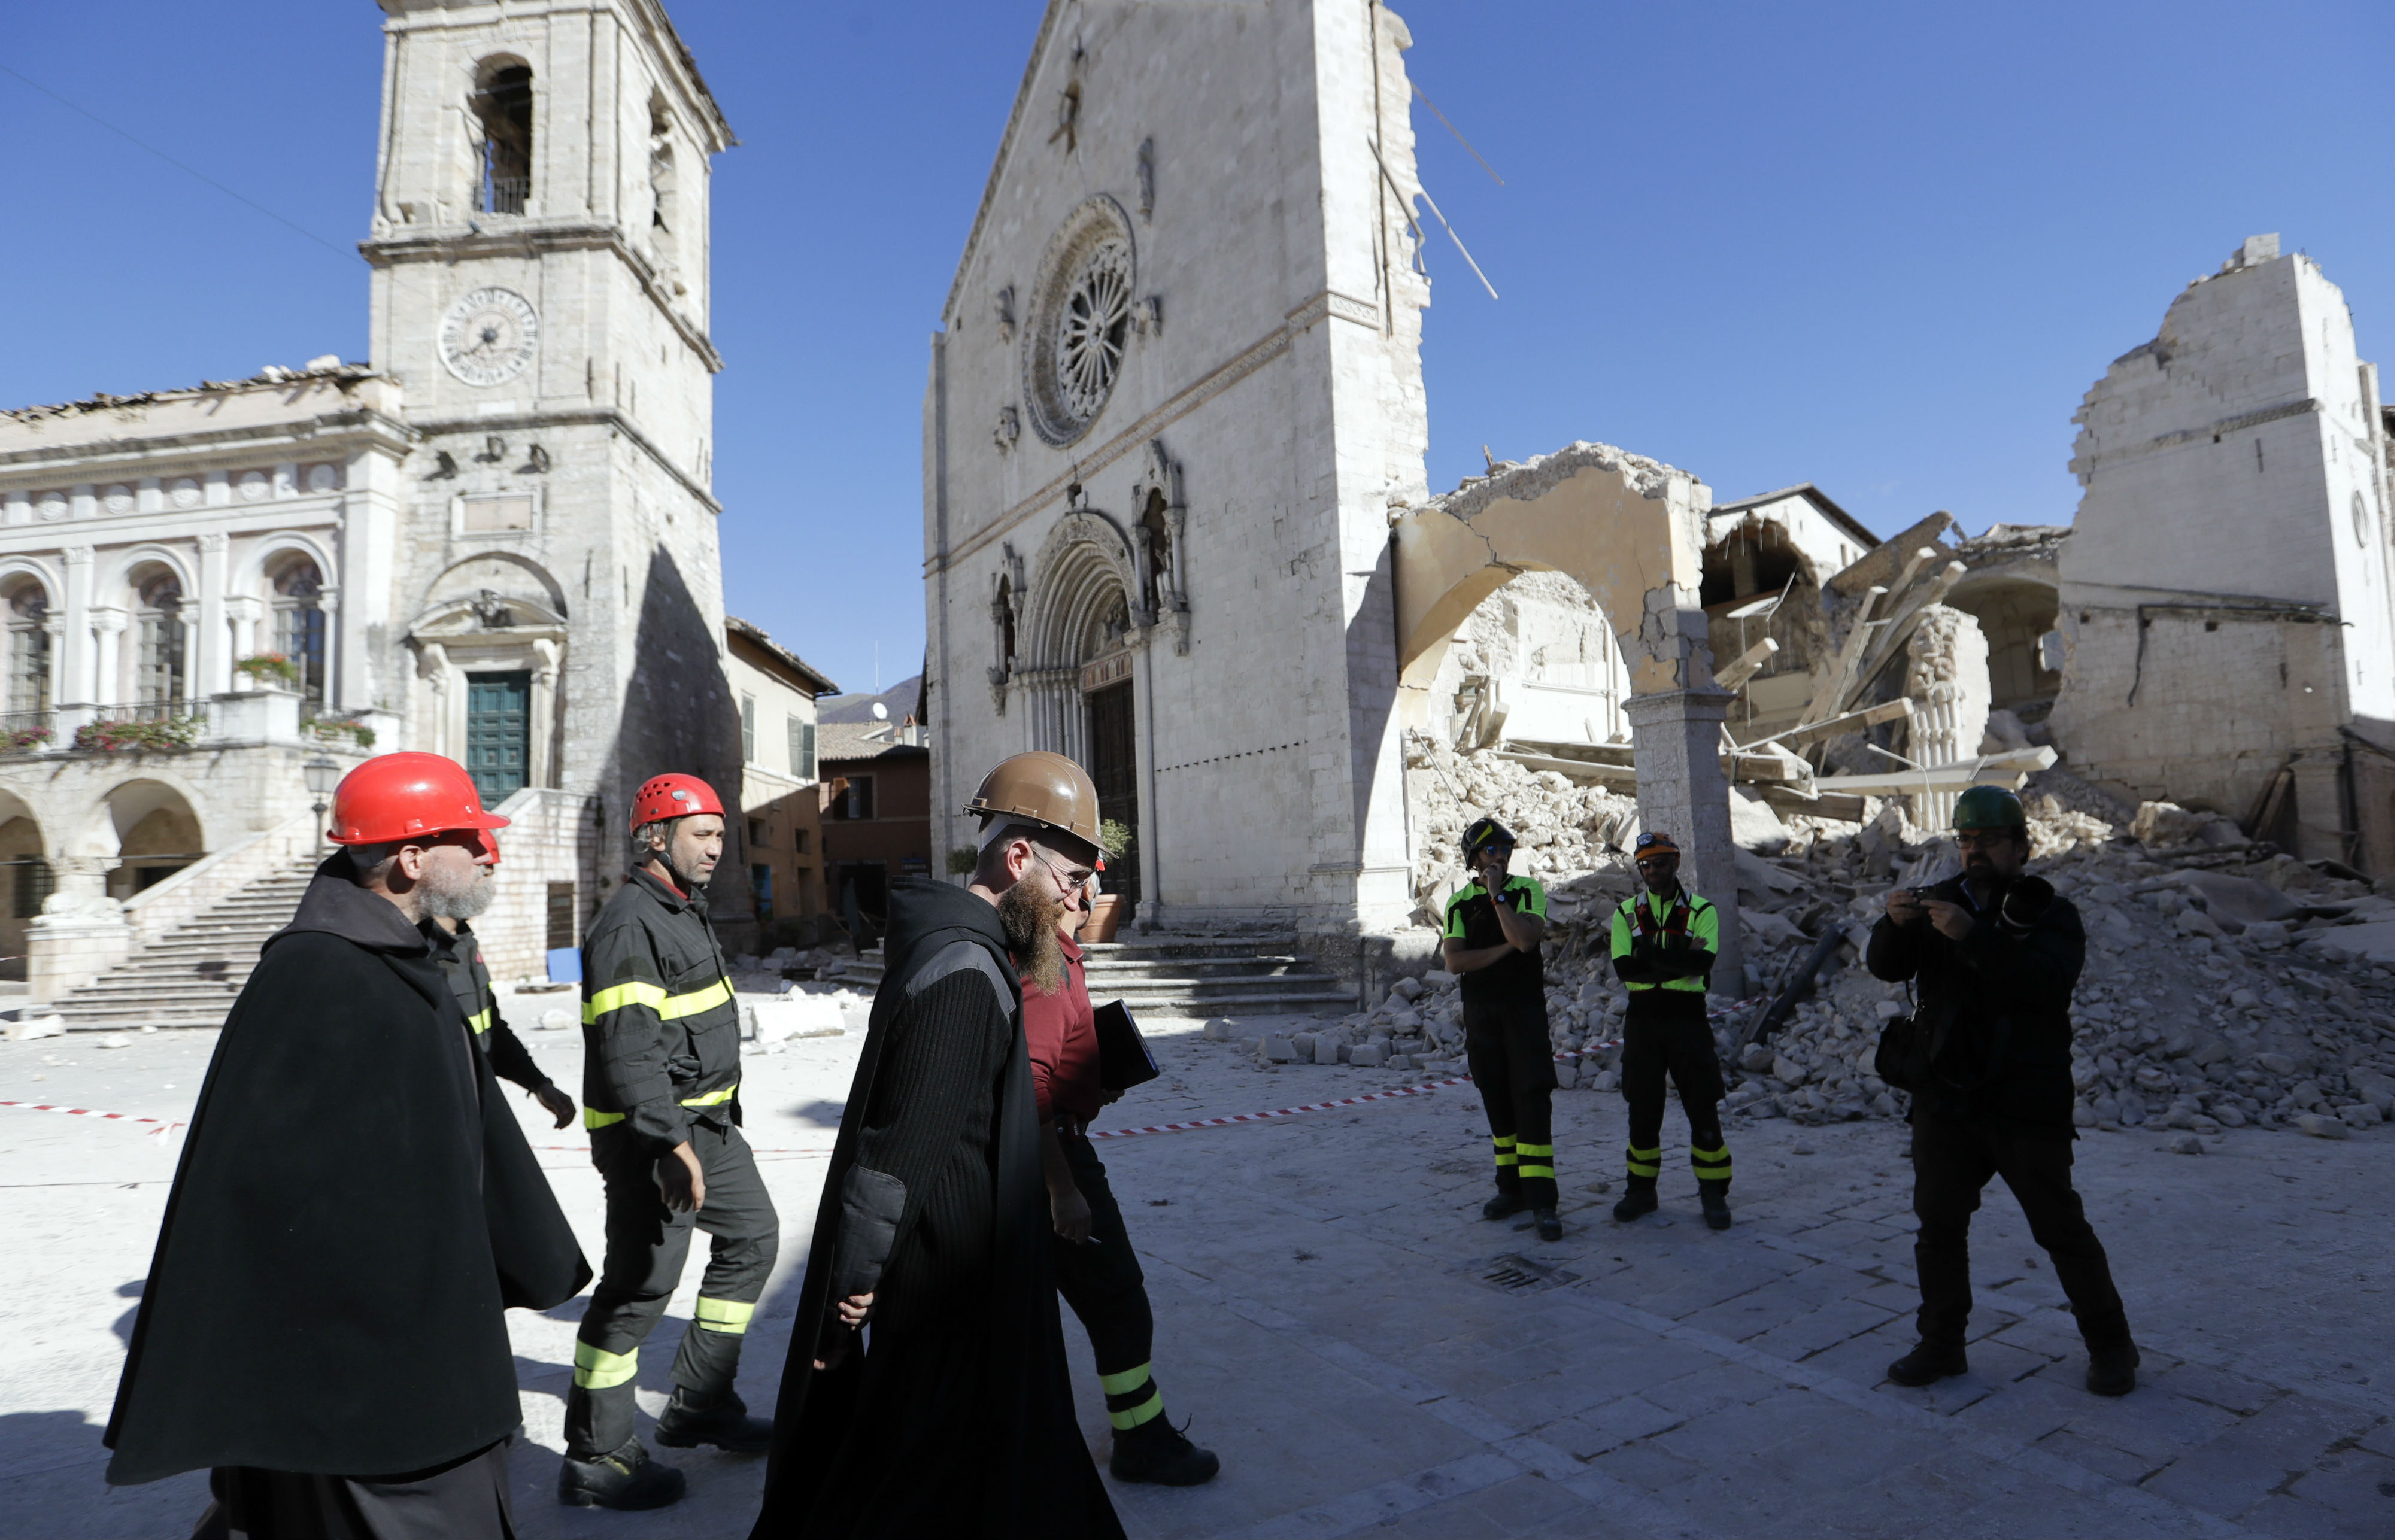 Priests to celebrate Masses outdoors after massive earthquake destroys town